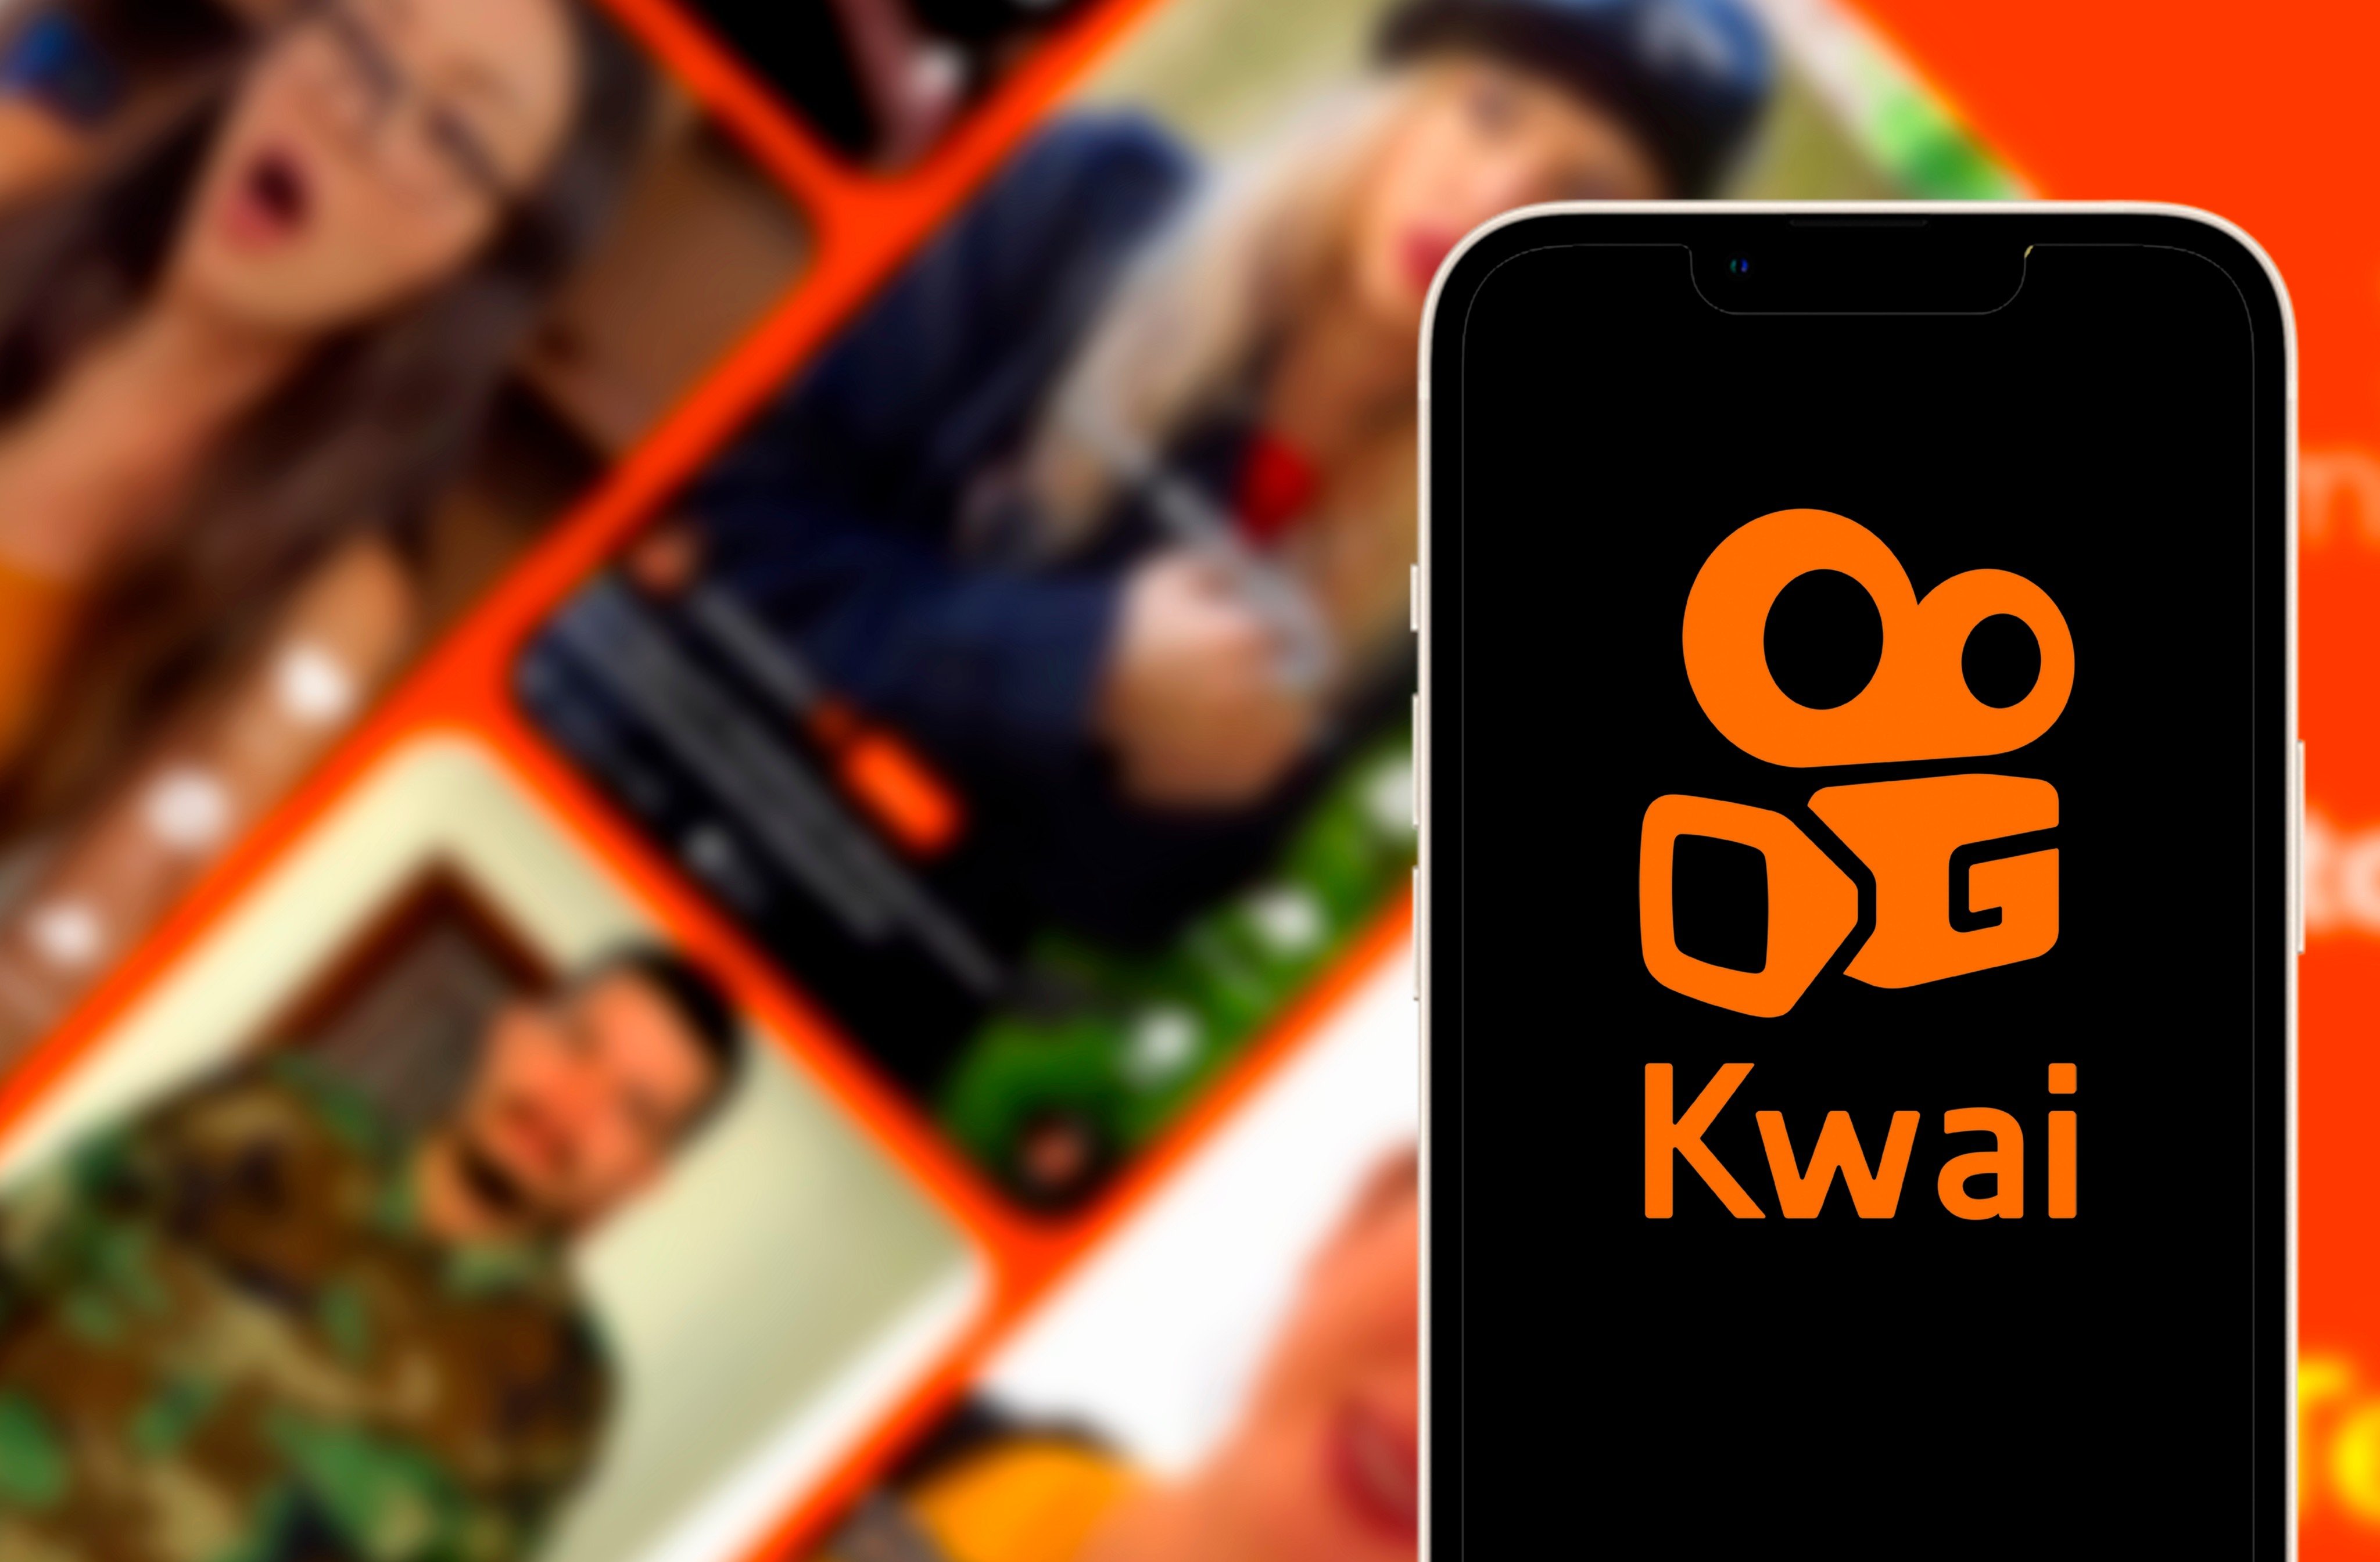 Kwai is a Chinese mobile video sharing app developed by Beijing-based Kuaishou for global users. Photo: Shutterstock